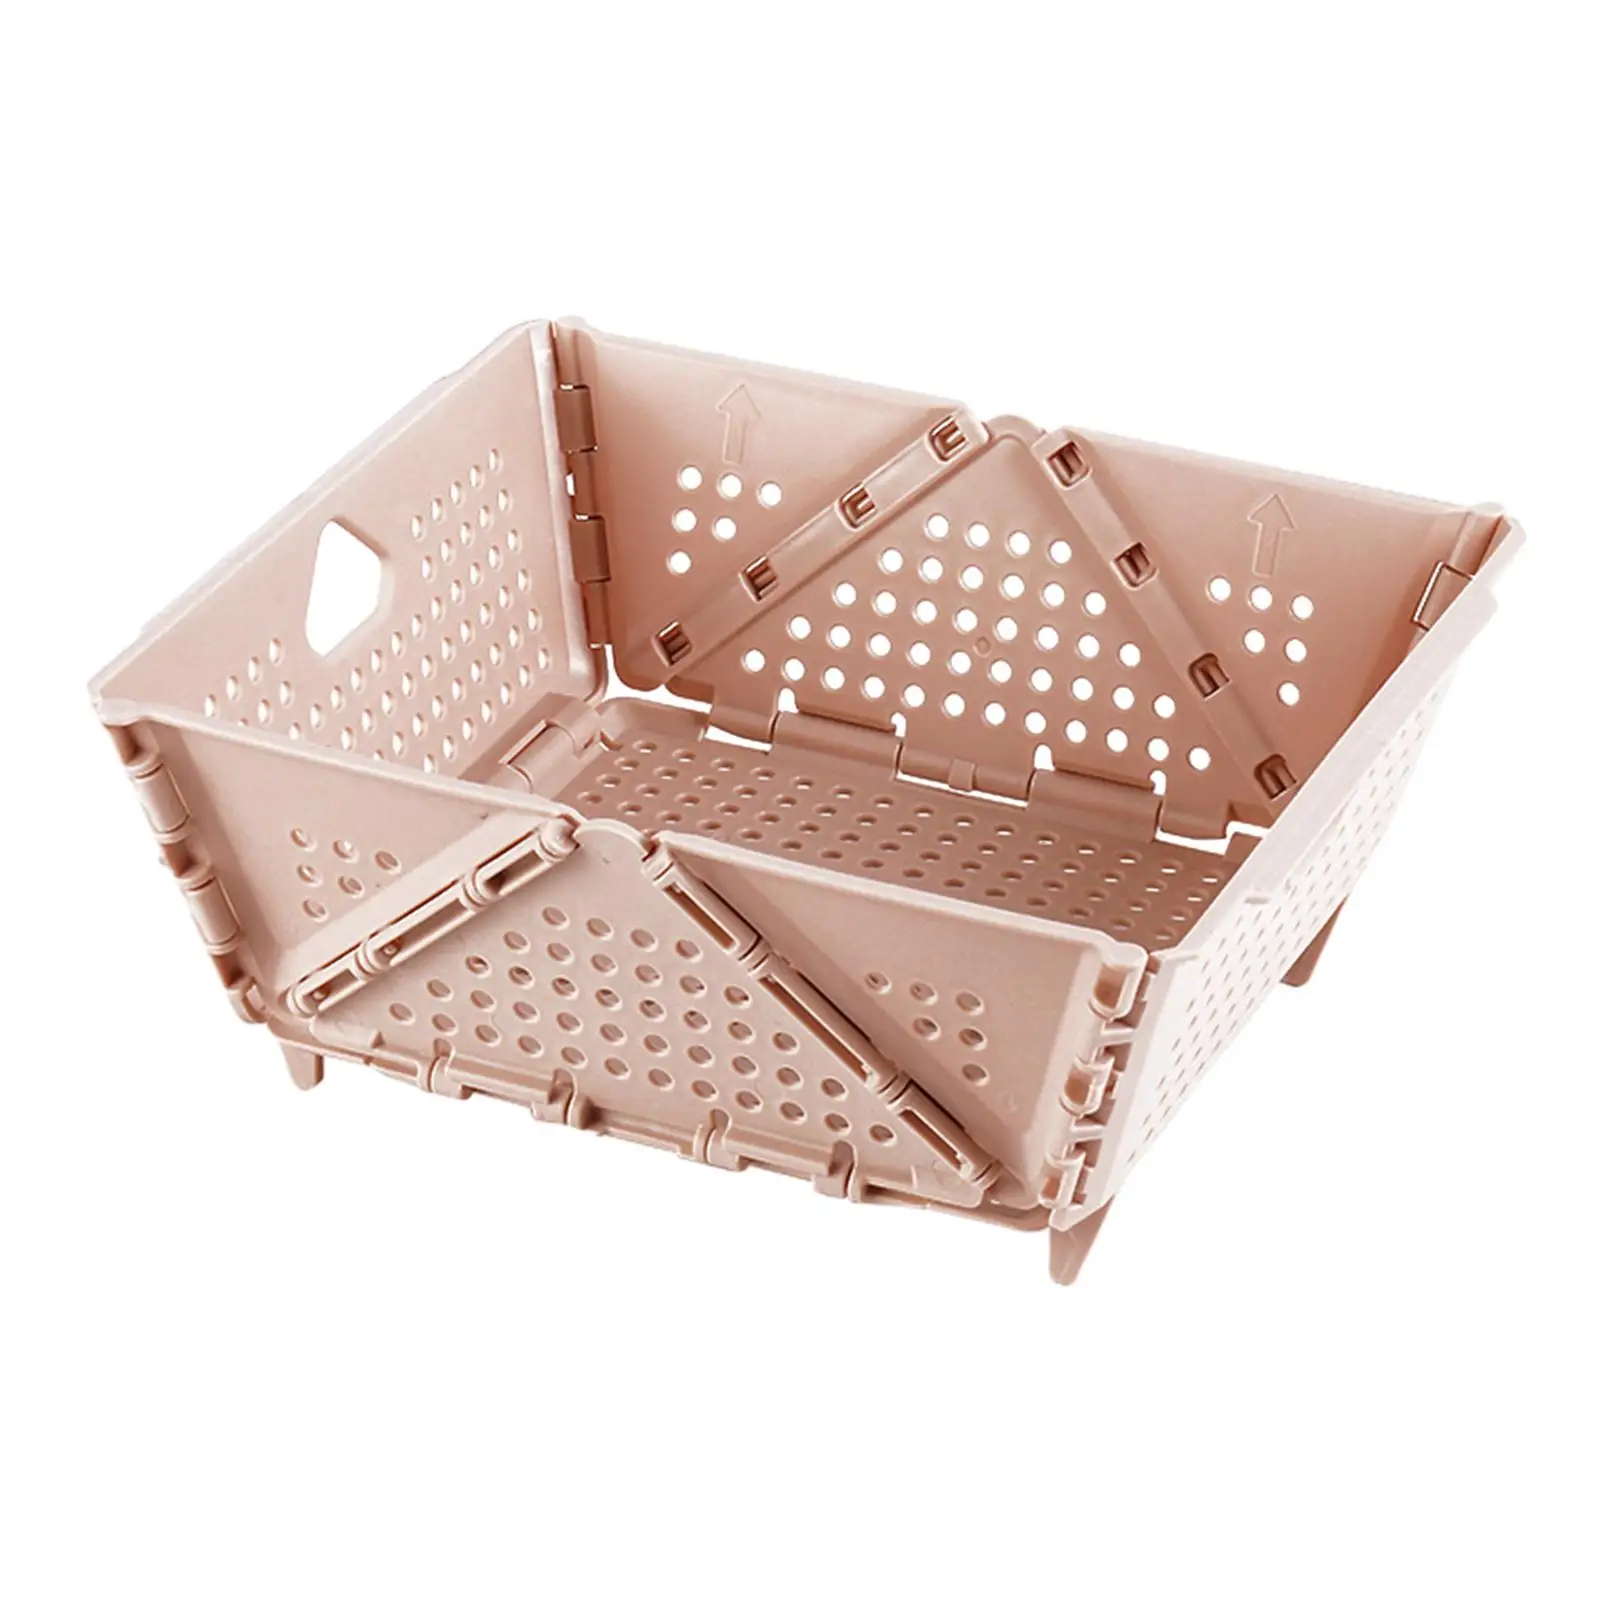 Small Folding Basket with Stand Base Multipurpose Foldable Drain Basket Collapsible Crates for Office Livingroom Kitchen Bedroom